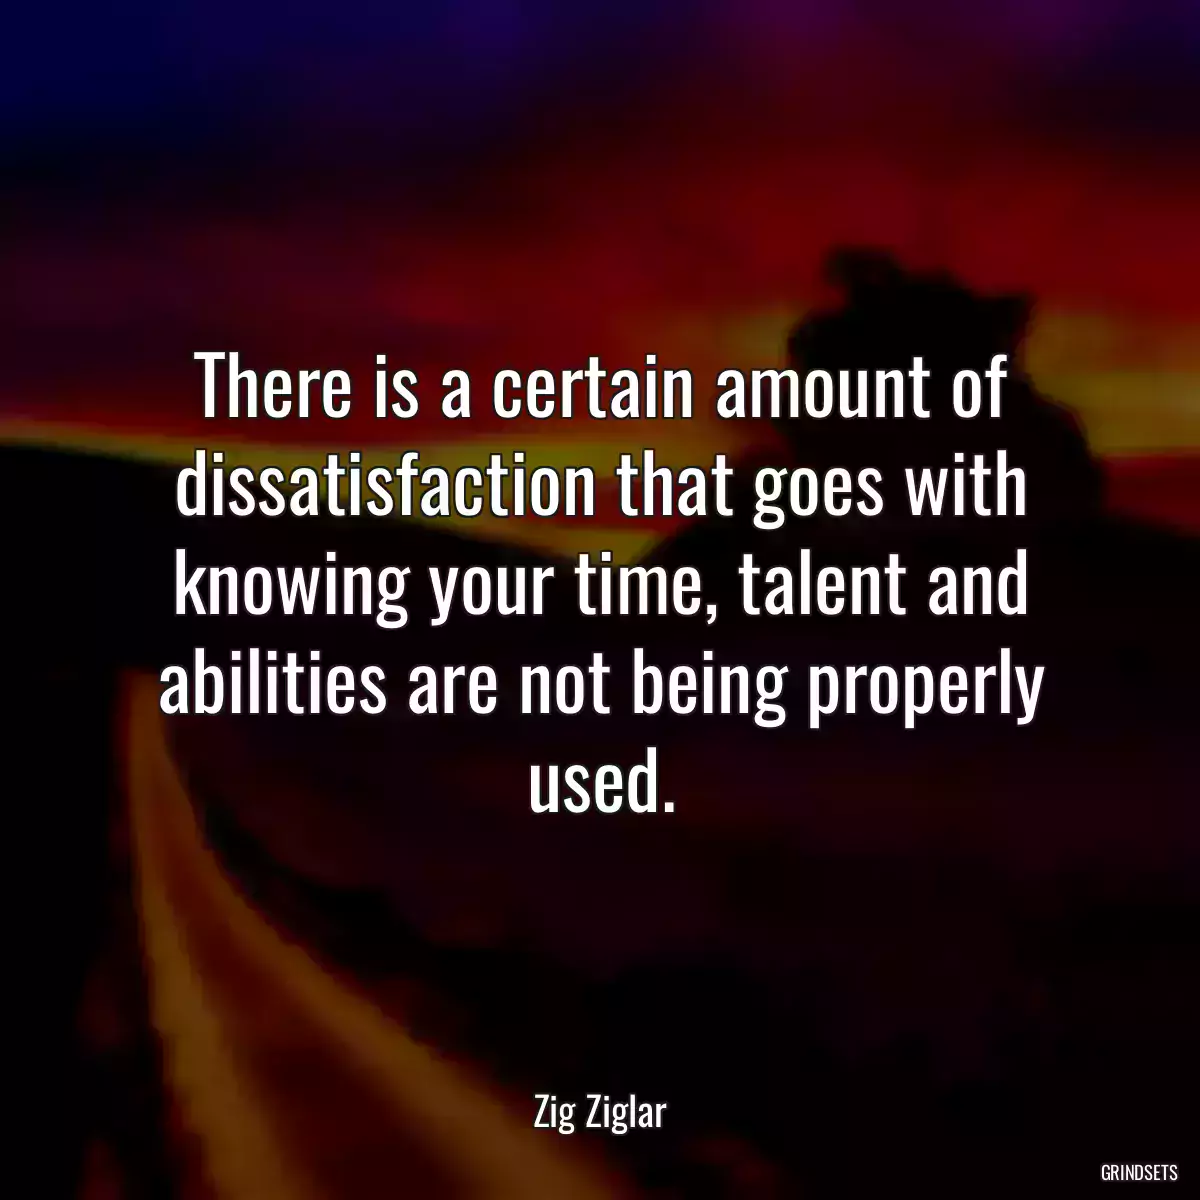 There is a certain amount of dissatisfaction that goes with knowing your time, talent and abilities are not being properly used.